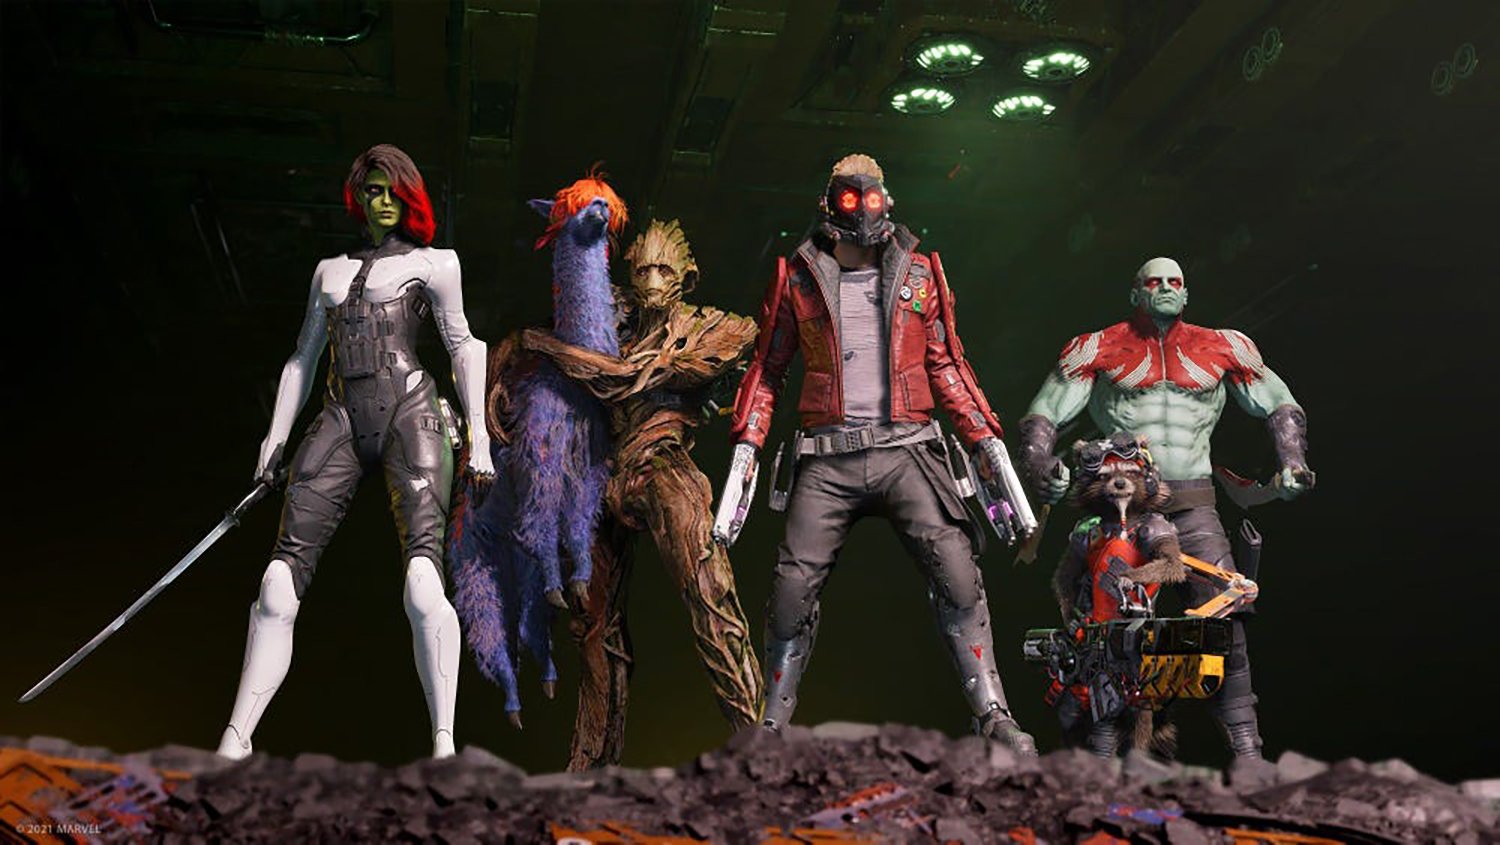 'Marvel's Guardians of the Galaxy' Story Trailer revealed during the PlayStation Showcase